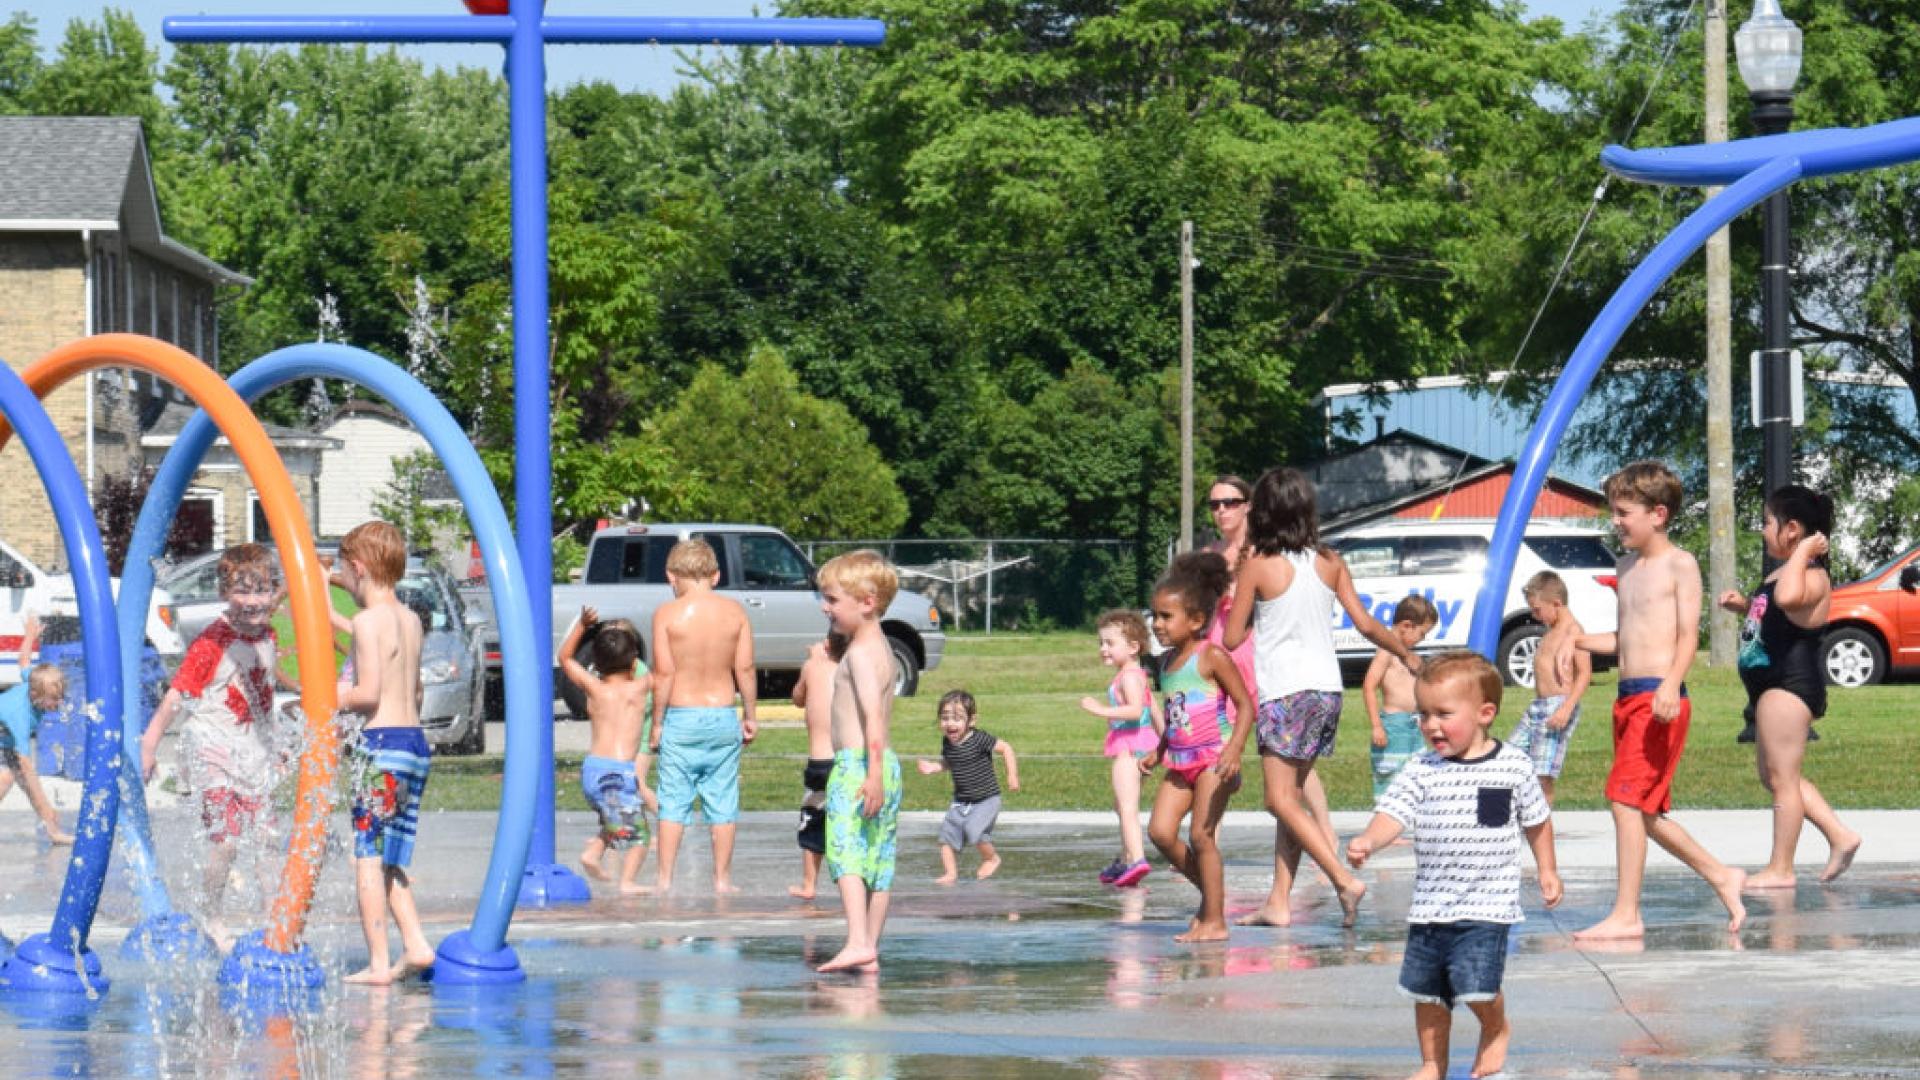 Children playing in a splashpark. There are a random assortment of water pipes and spouts.